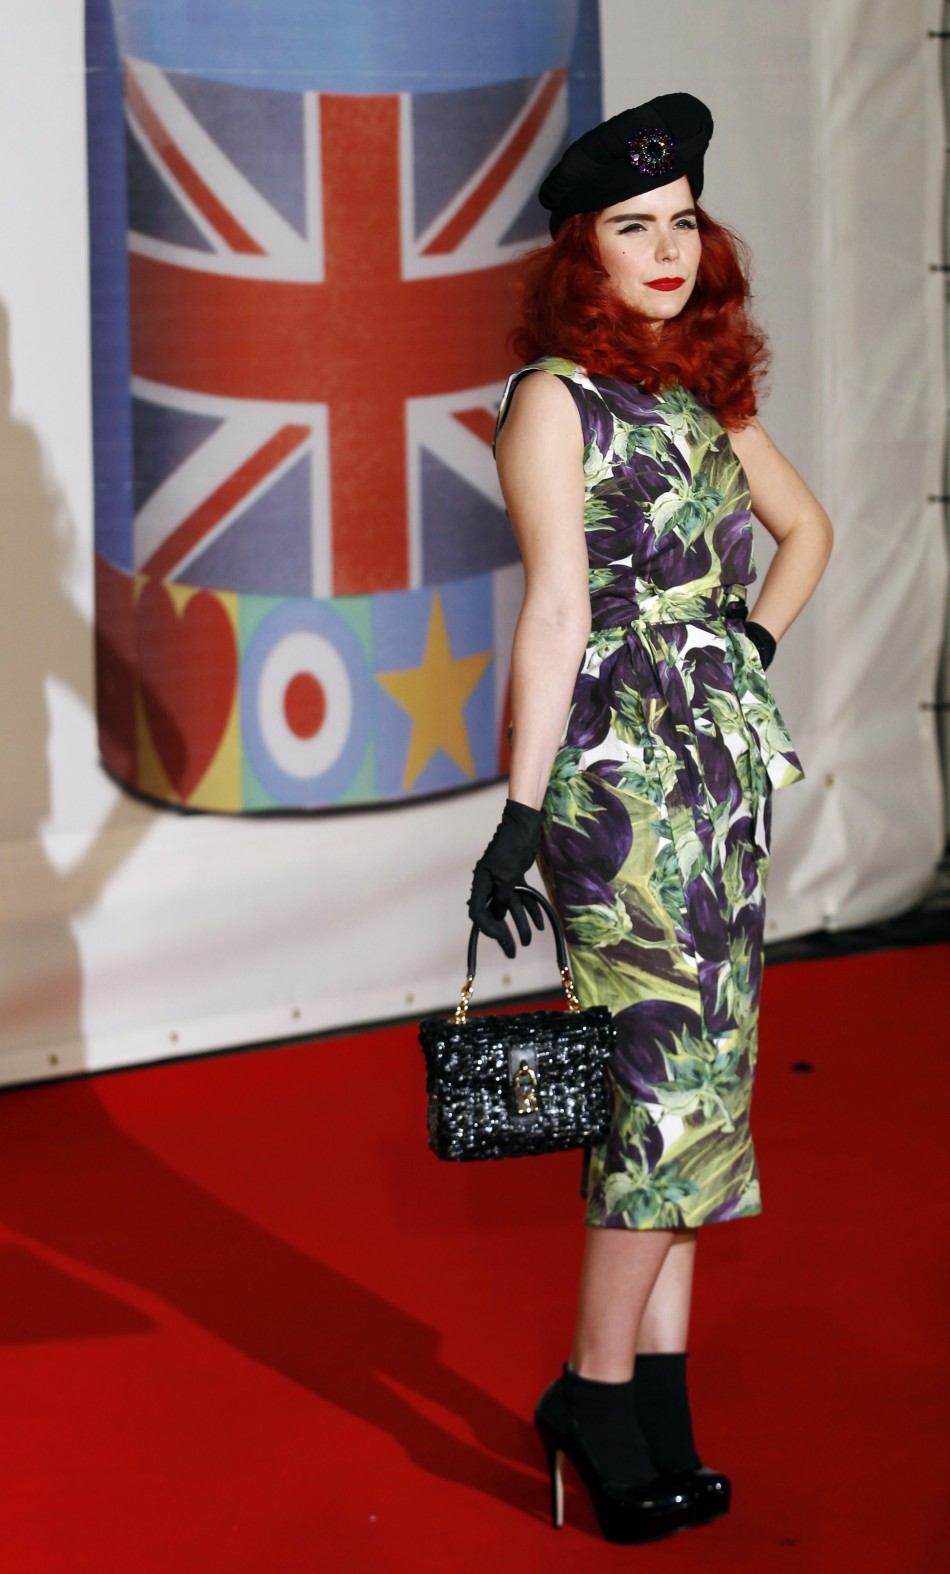 Paloma Faith arrives for the BRIT Music Awards at the O2 Arena in London